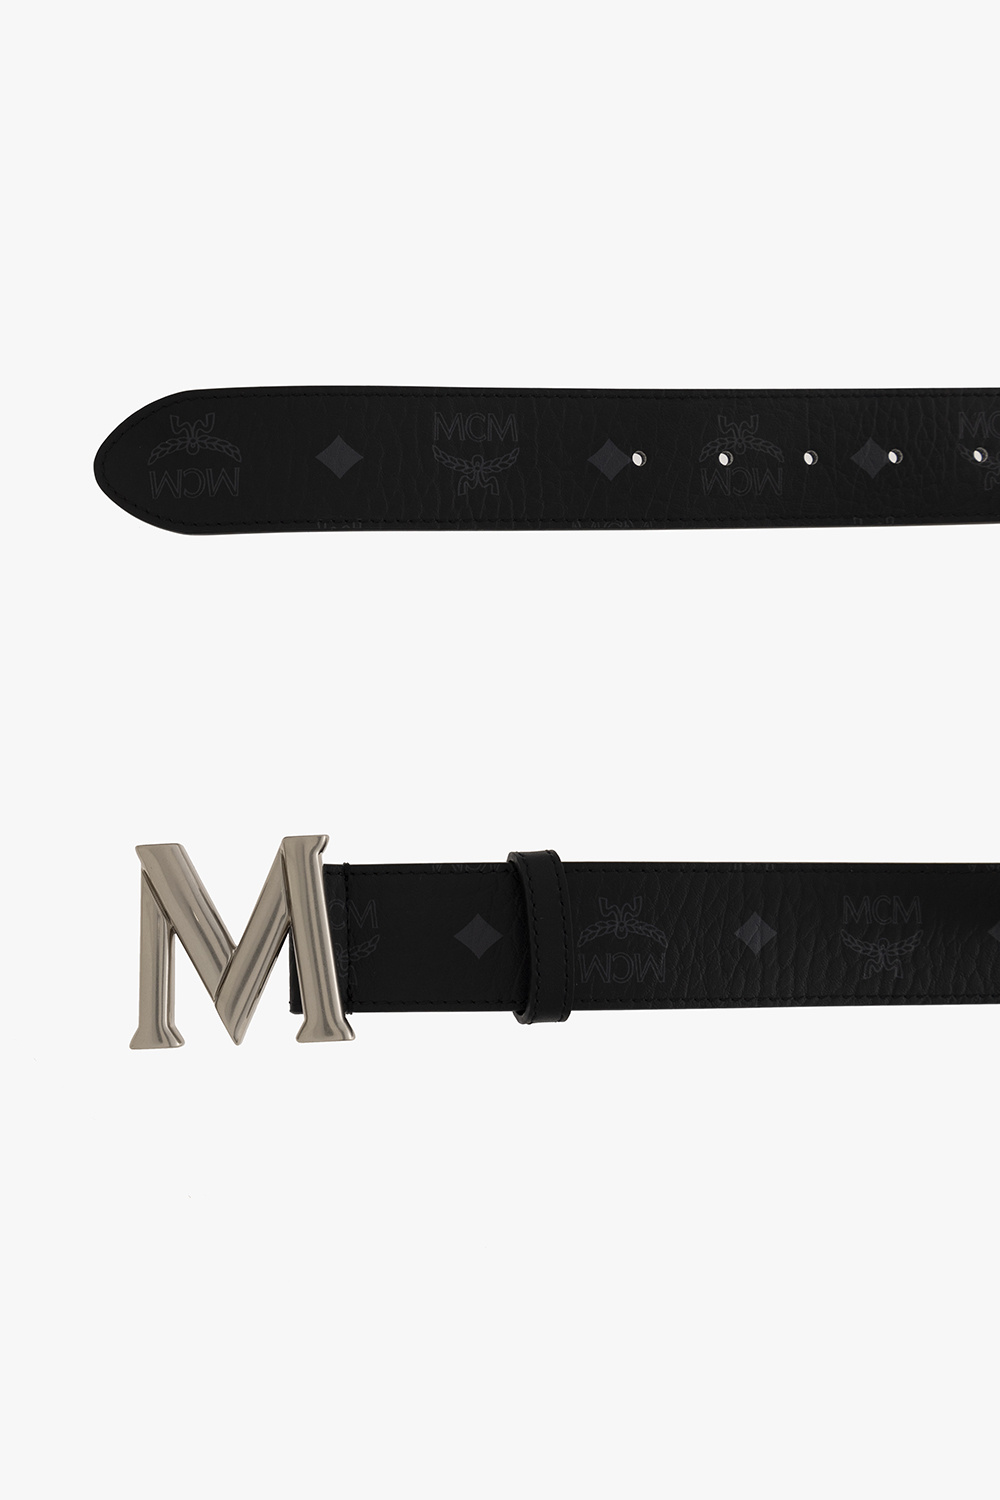 MCM, Accessories, Authentic Mcm Belt Reversible Other Side Black